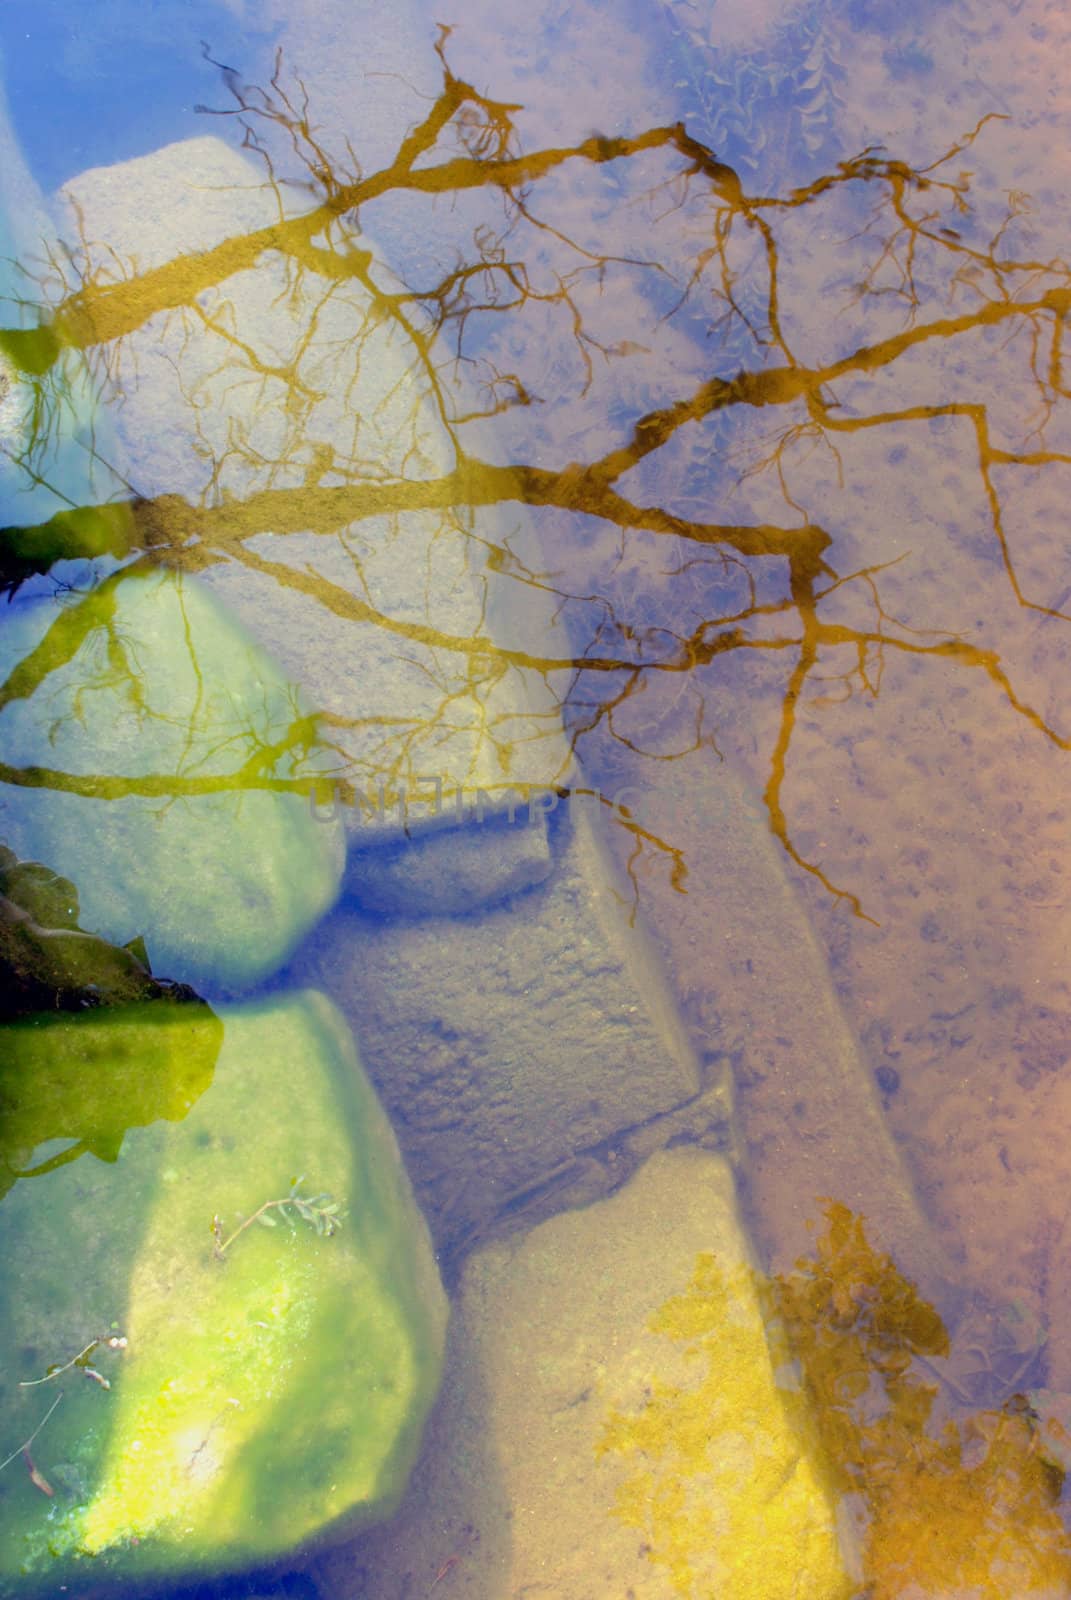 Reflection of tree branches in coastal water with stones